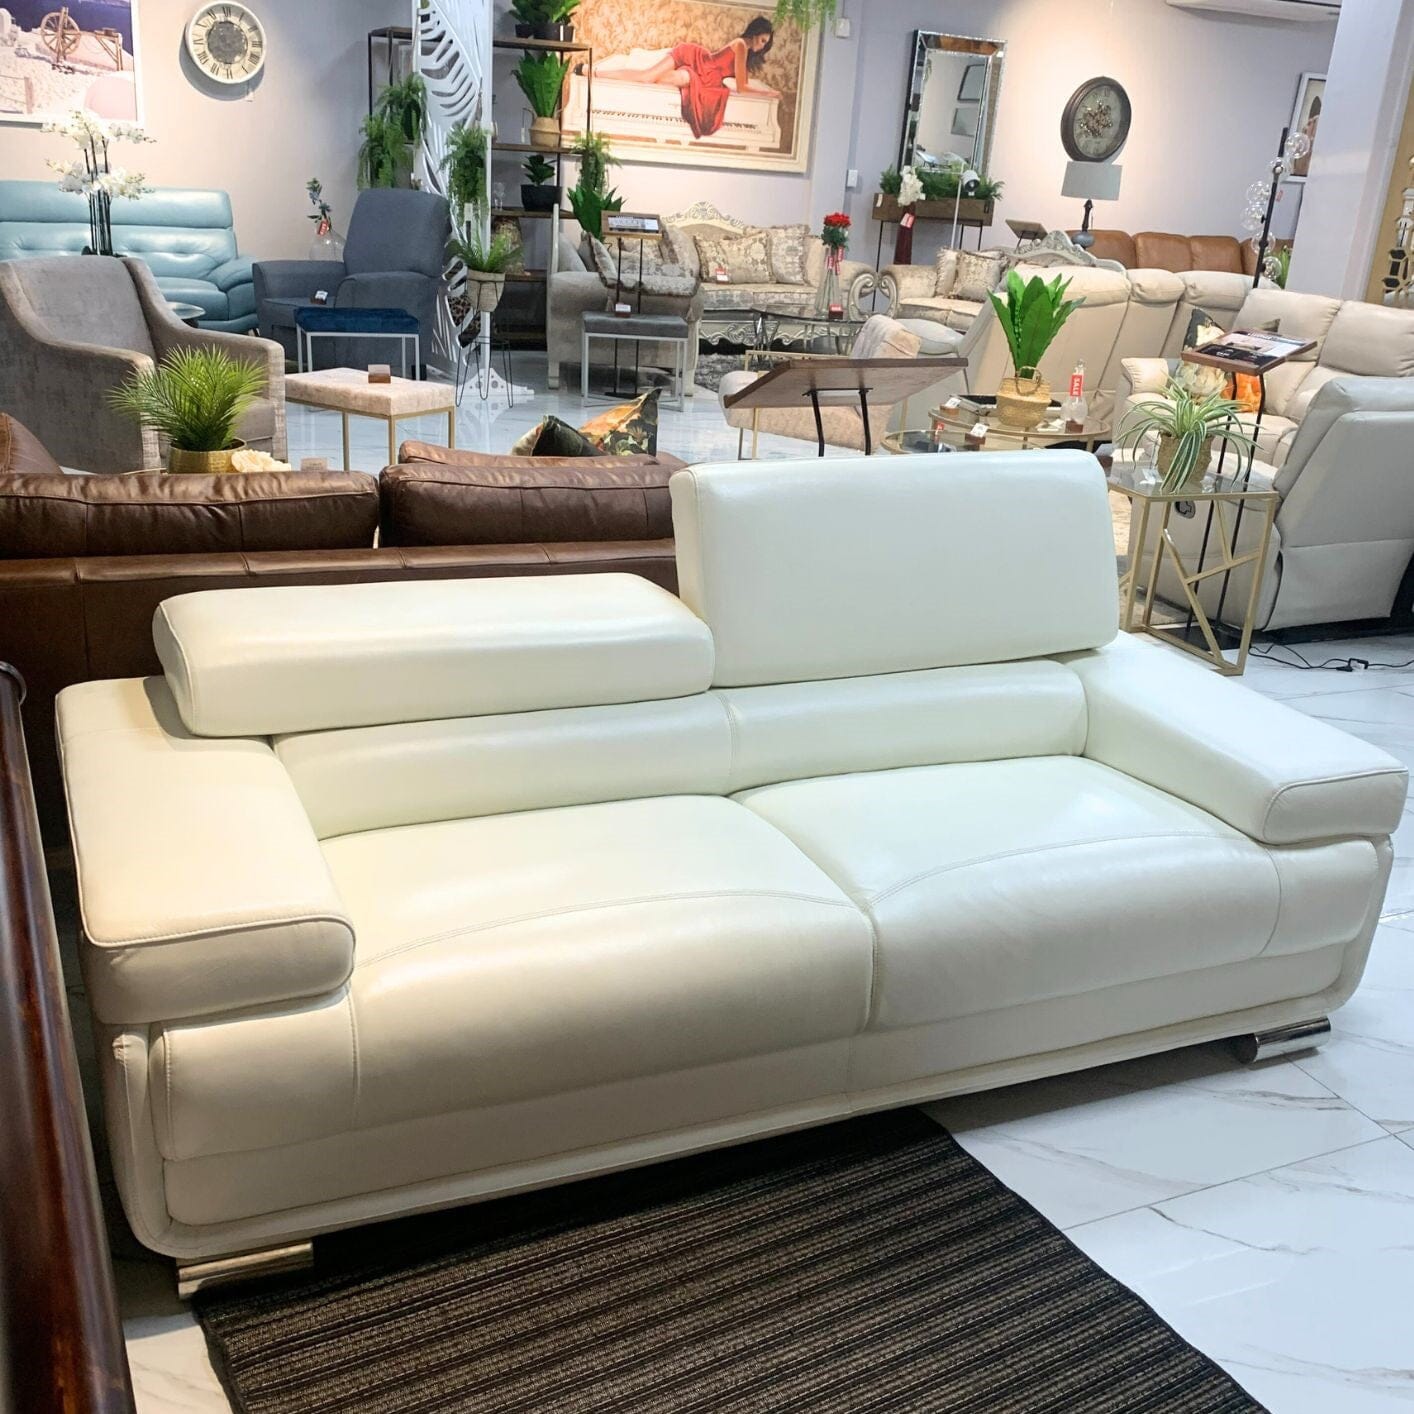 Tobago 3 Leather Sofa - Warehouse Clearance Fabric Corner Suite Leather Gallery White 